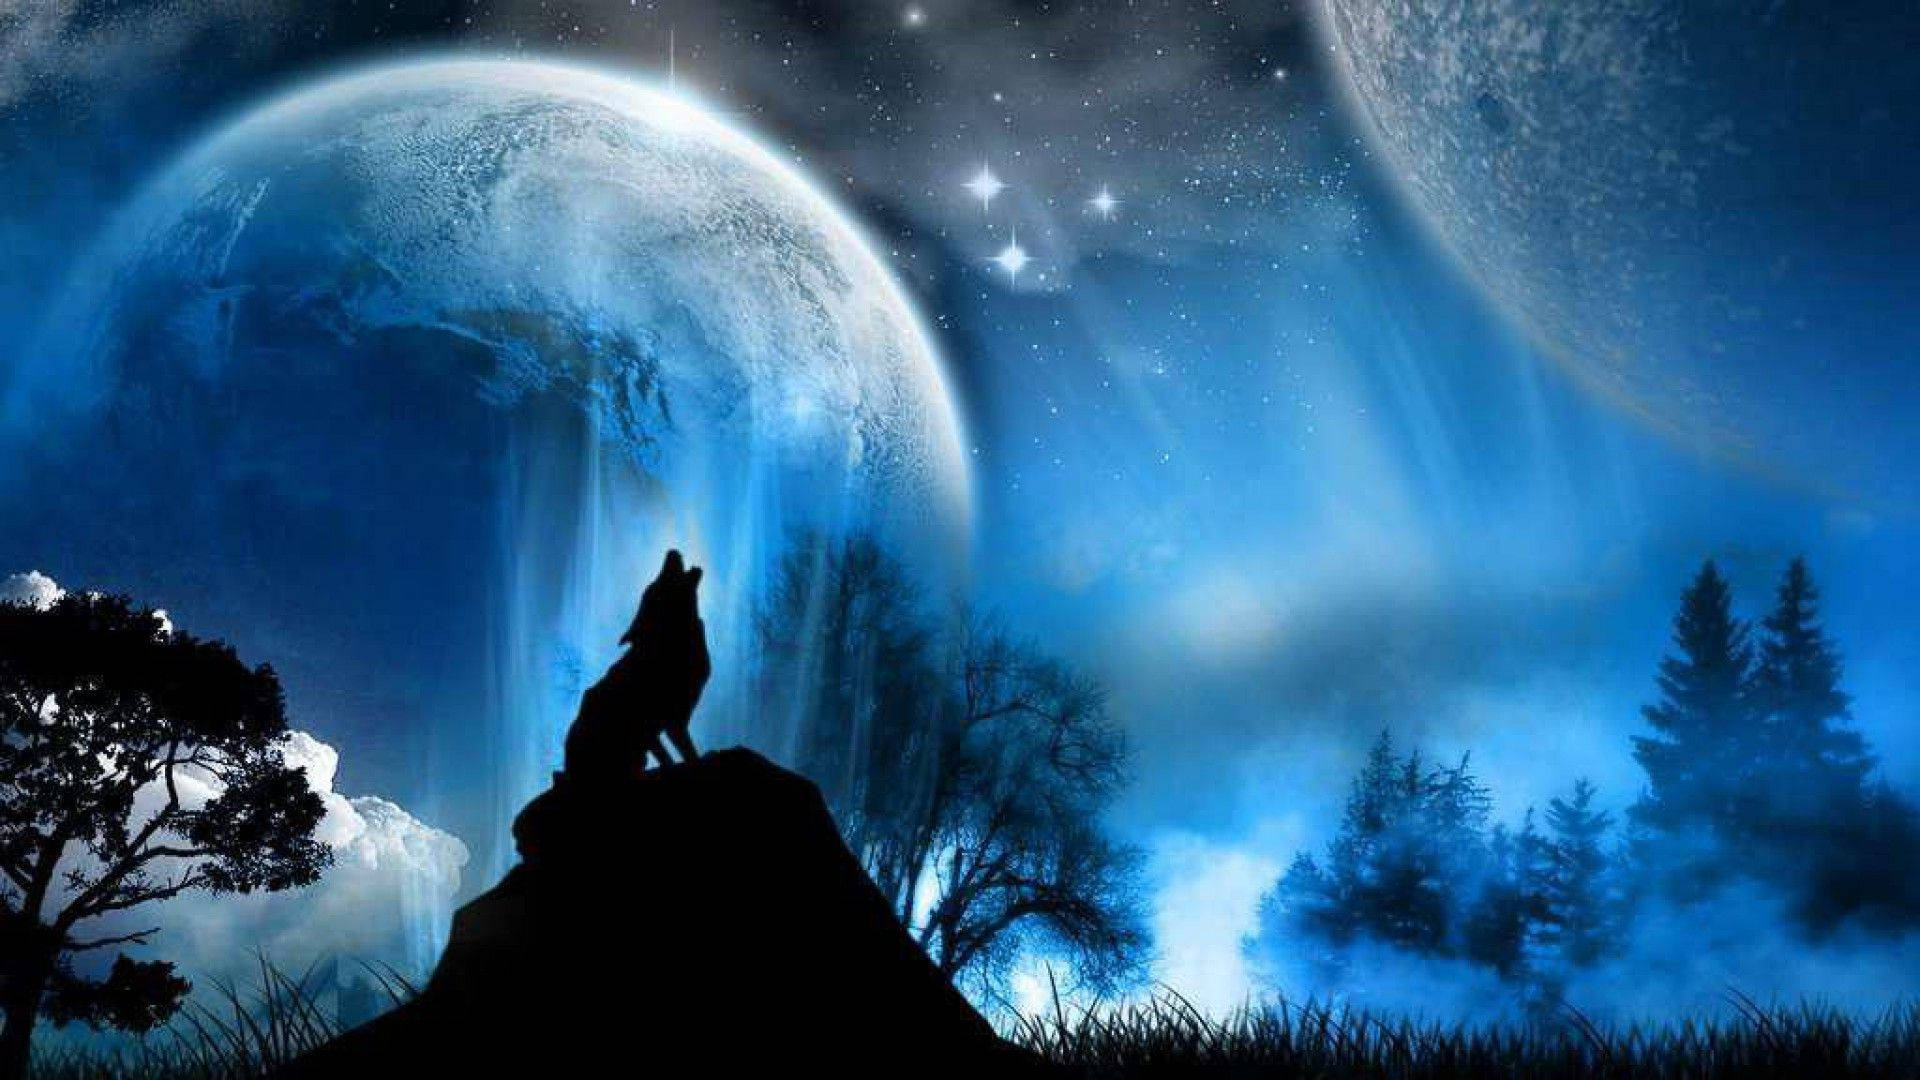 A Howling Wolf Painting Wallpaper